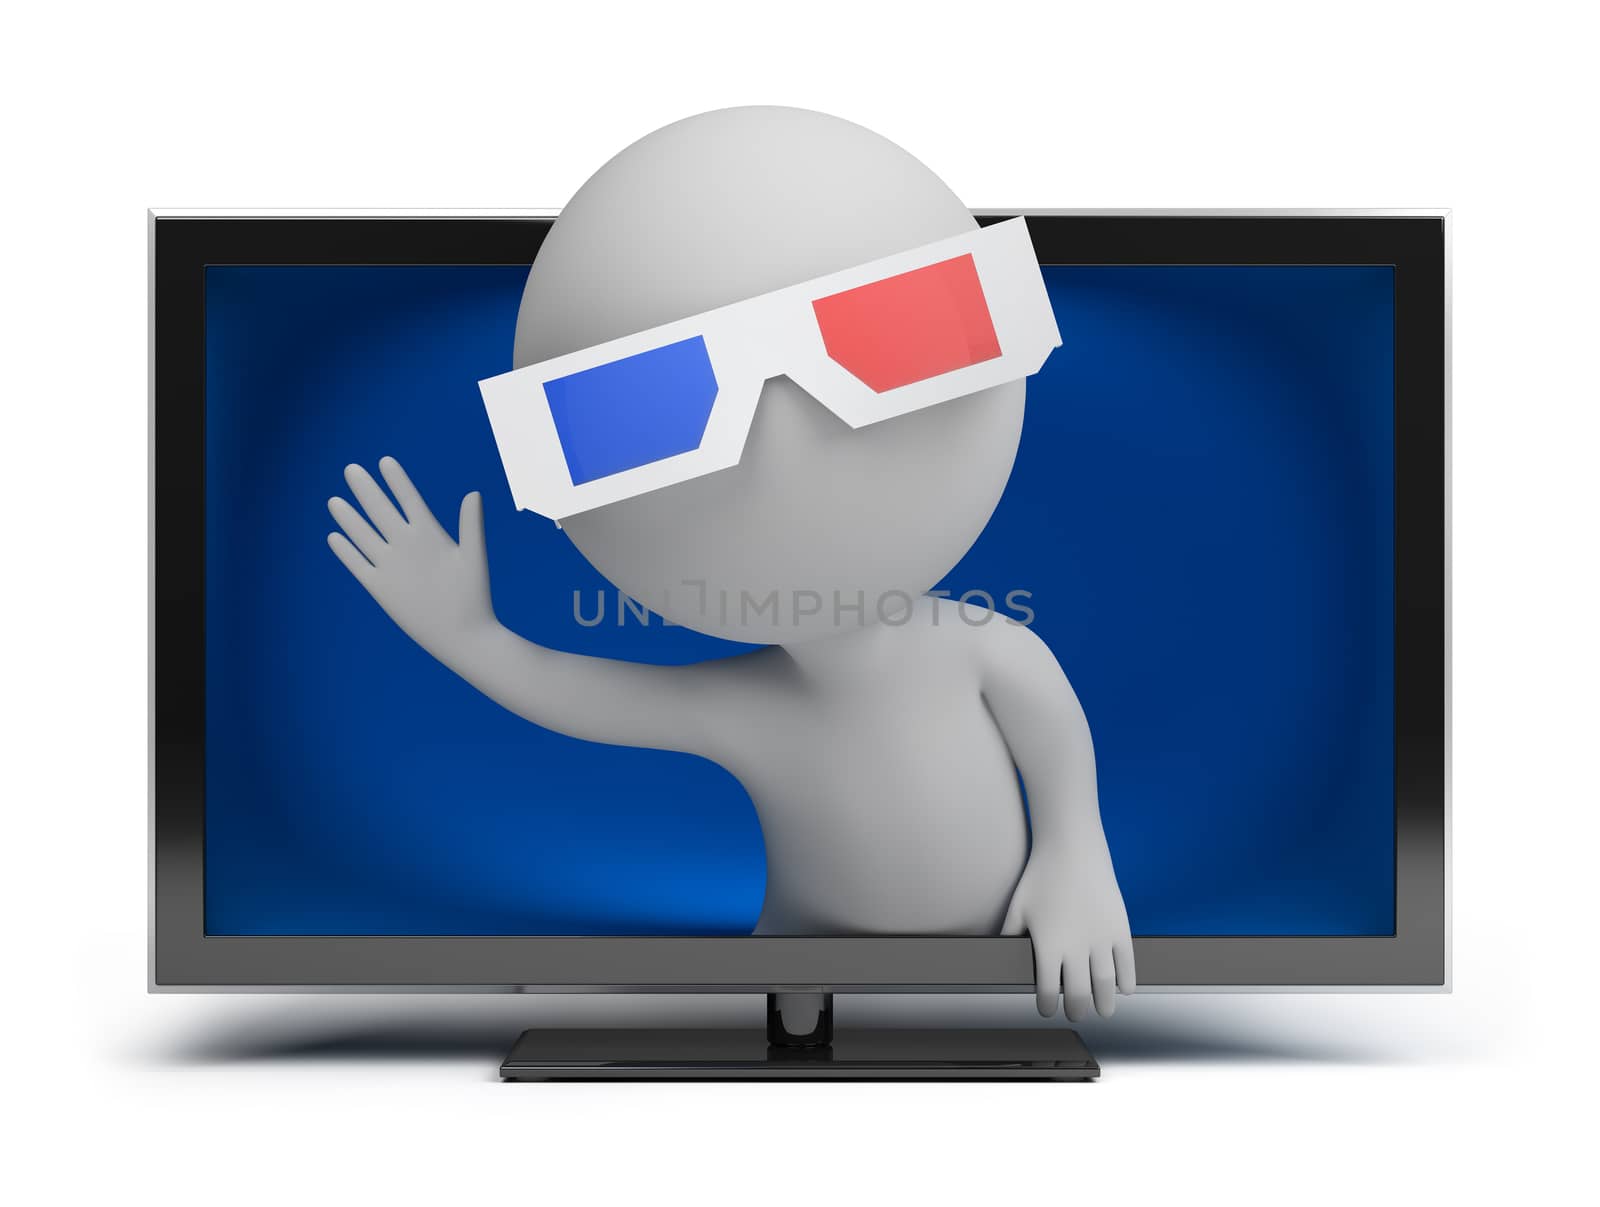 3d small person looks out from the TV screen. 3d image. Isolated white background.